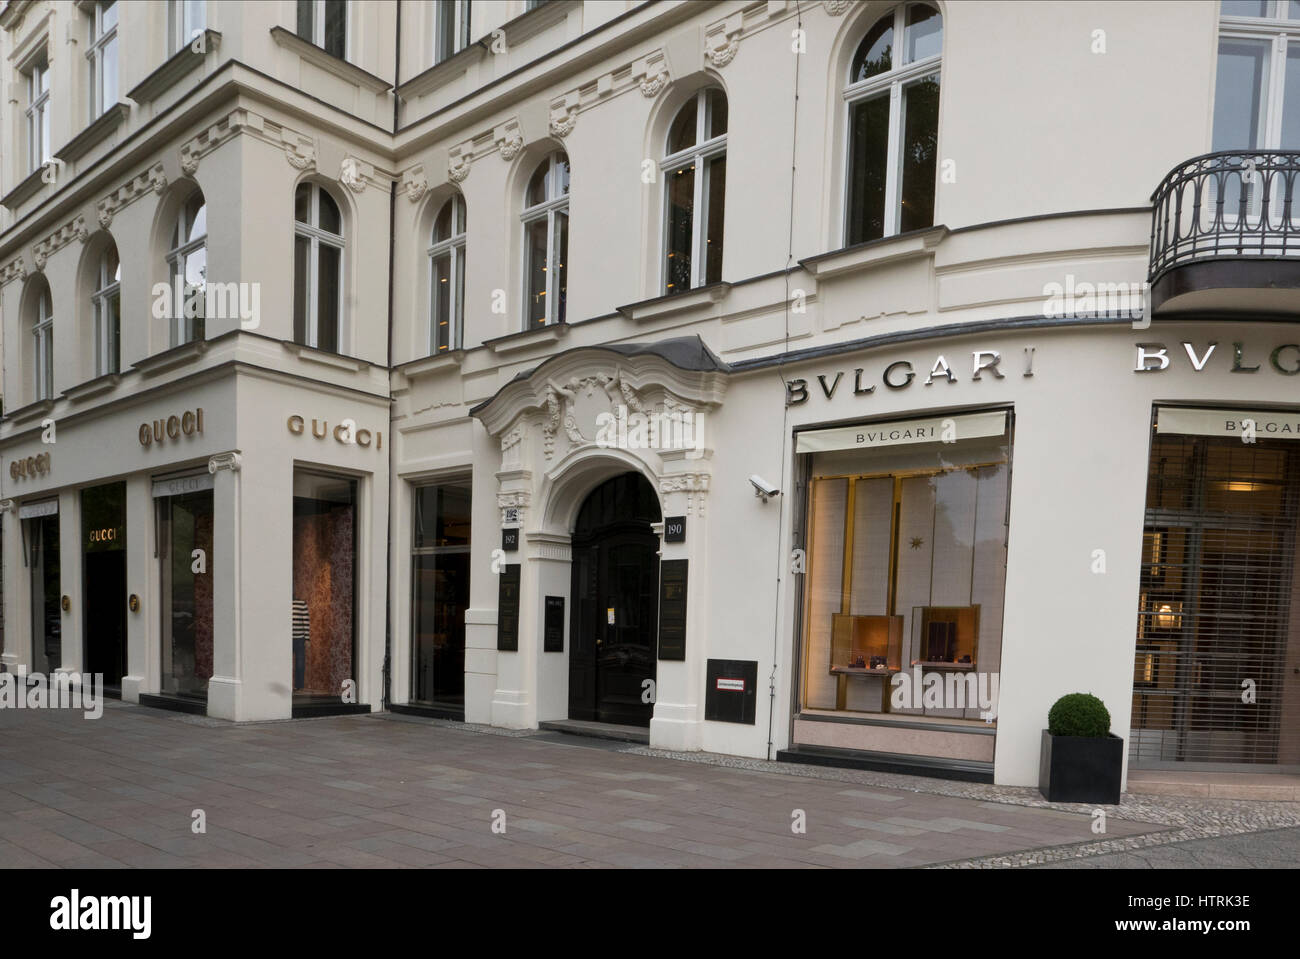 The exterior of a luxurious Gucci shop, Berlin, Germany Stock Photo - Alamy